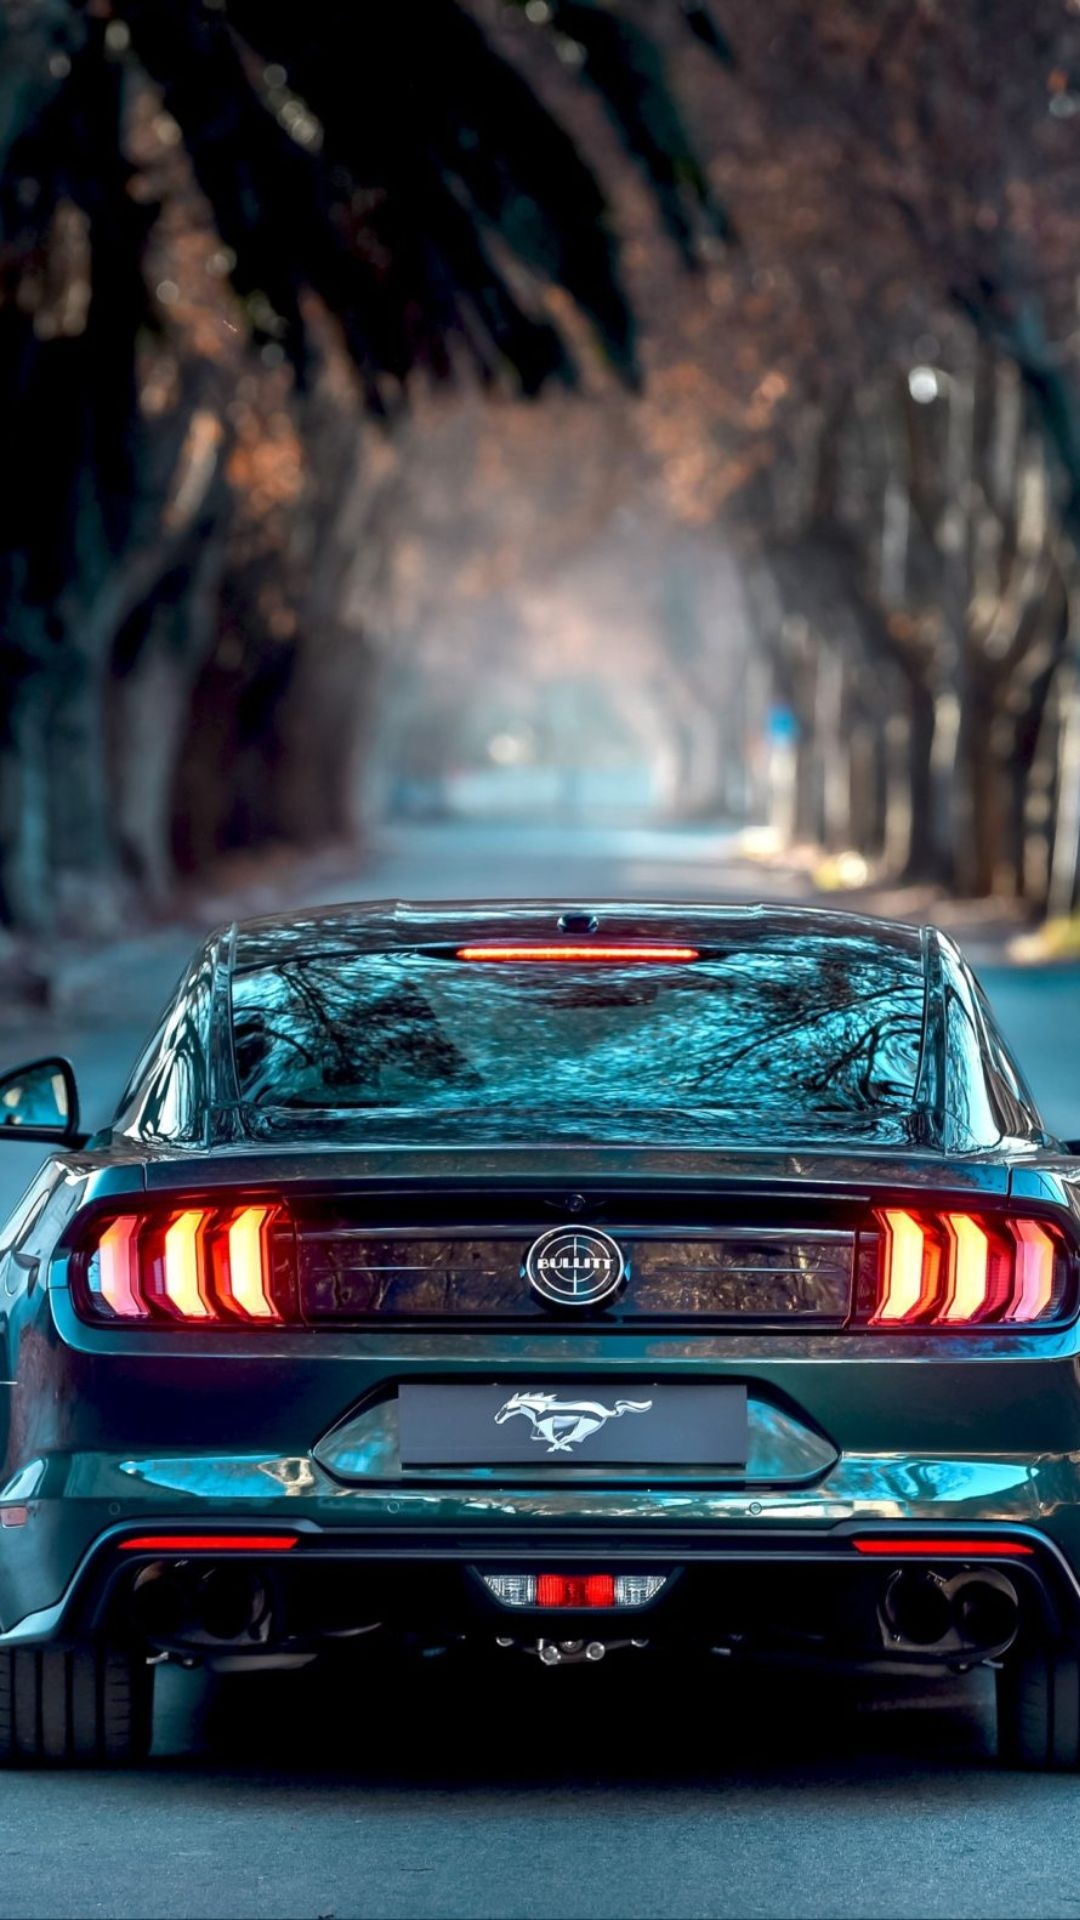 Mustang array, Power and beauty, Muscle car variety, High-quality captures, Road dominance, 1080x1920 Full HD Handy